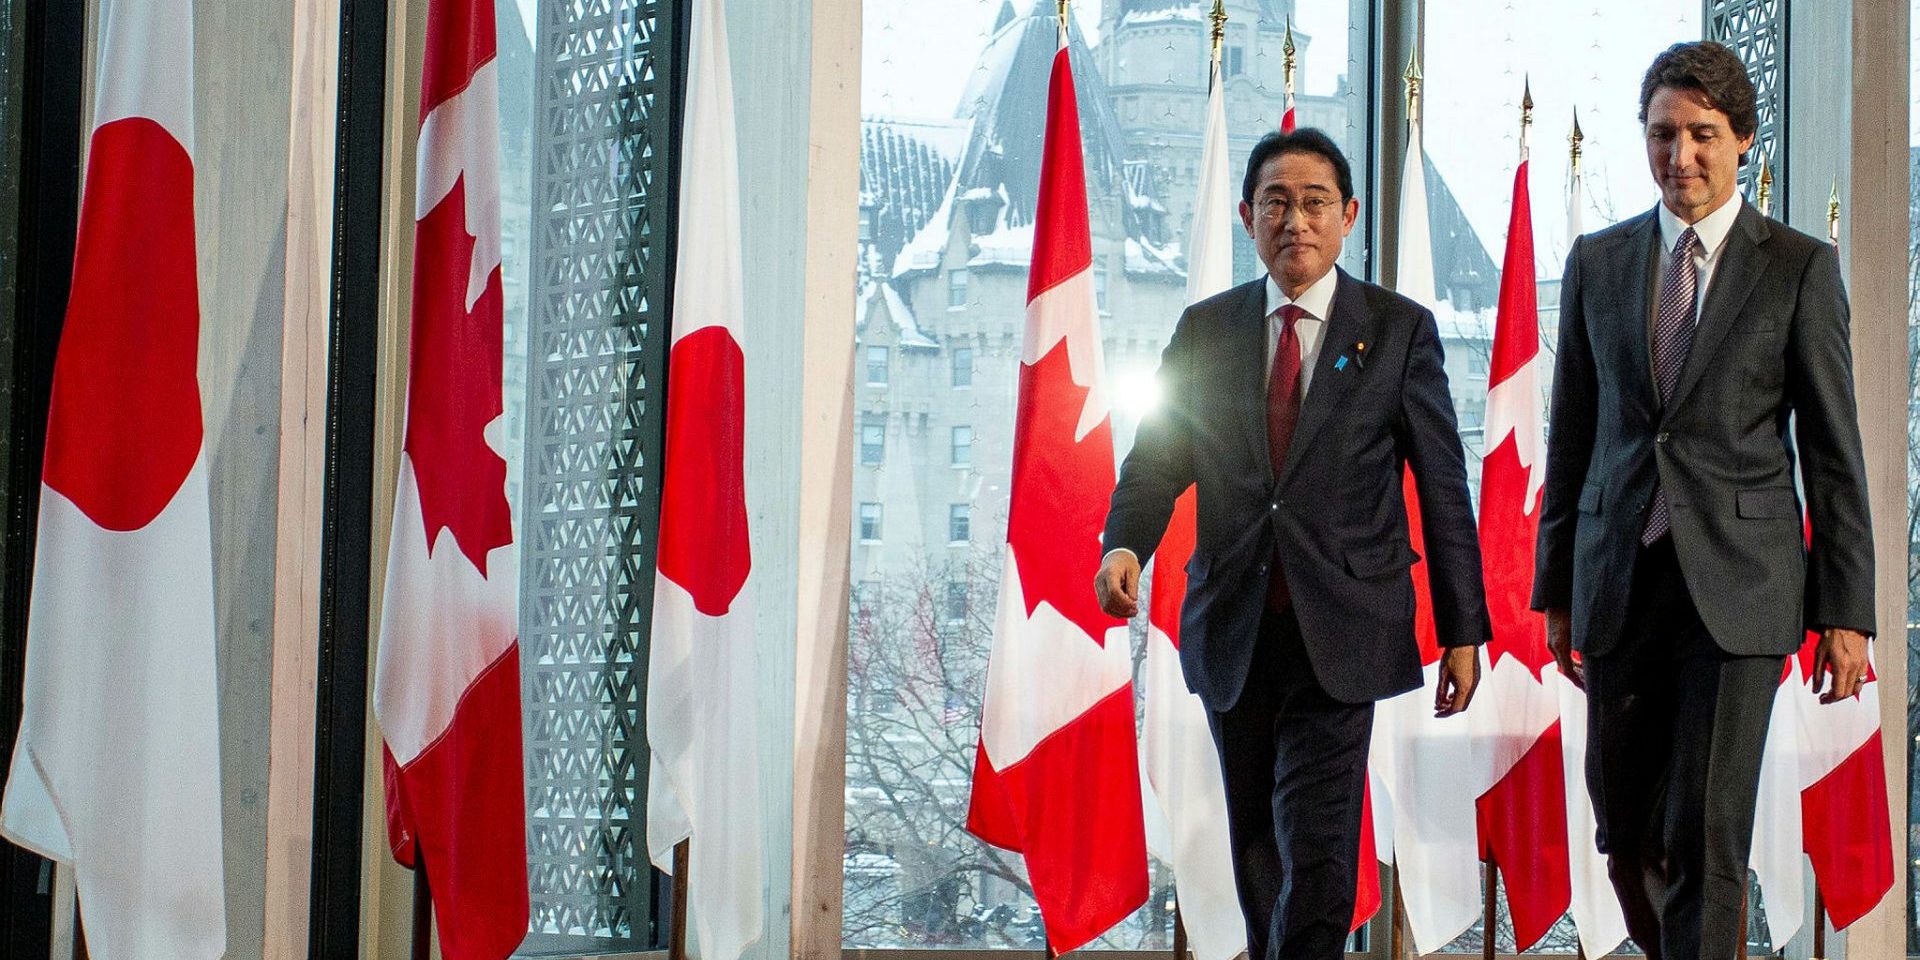 Prime Minister Justin Trudeau and Japanese Prime Minister Kishida Fumio hold a joint media availability at the National Arts Centre in Ottawa on Jan. 12, 2023. Andrew Meade